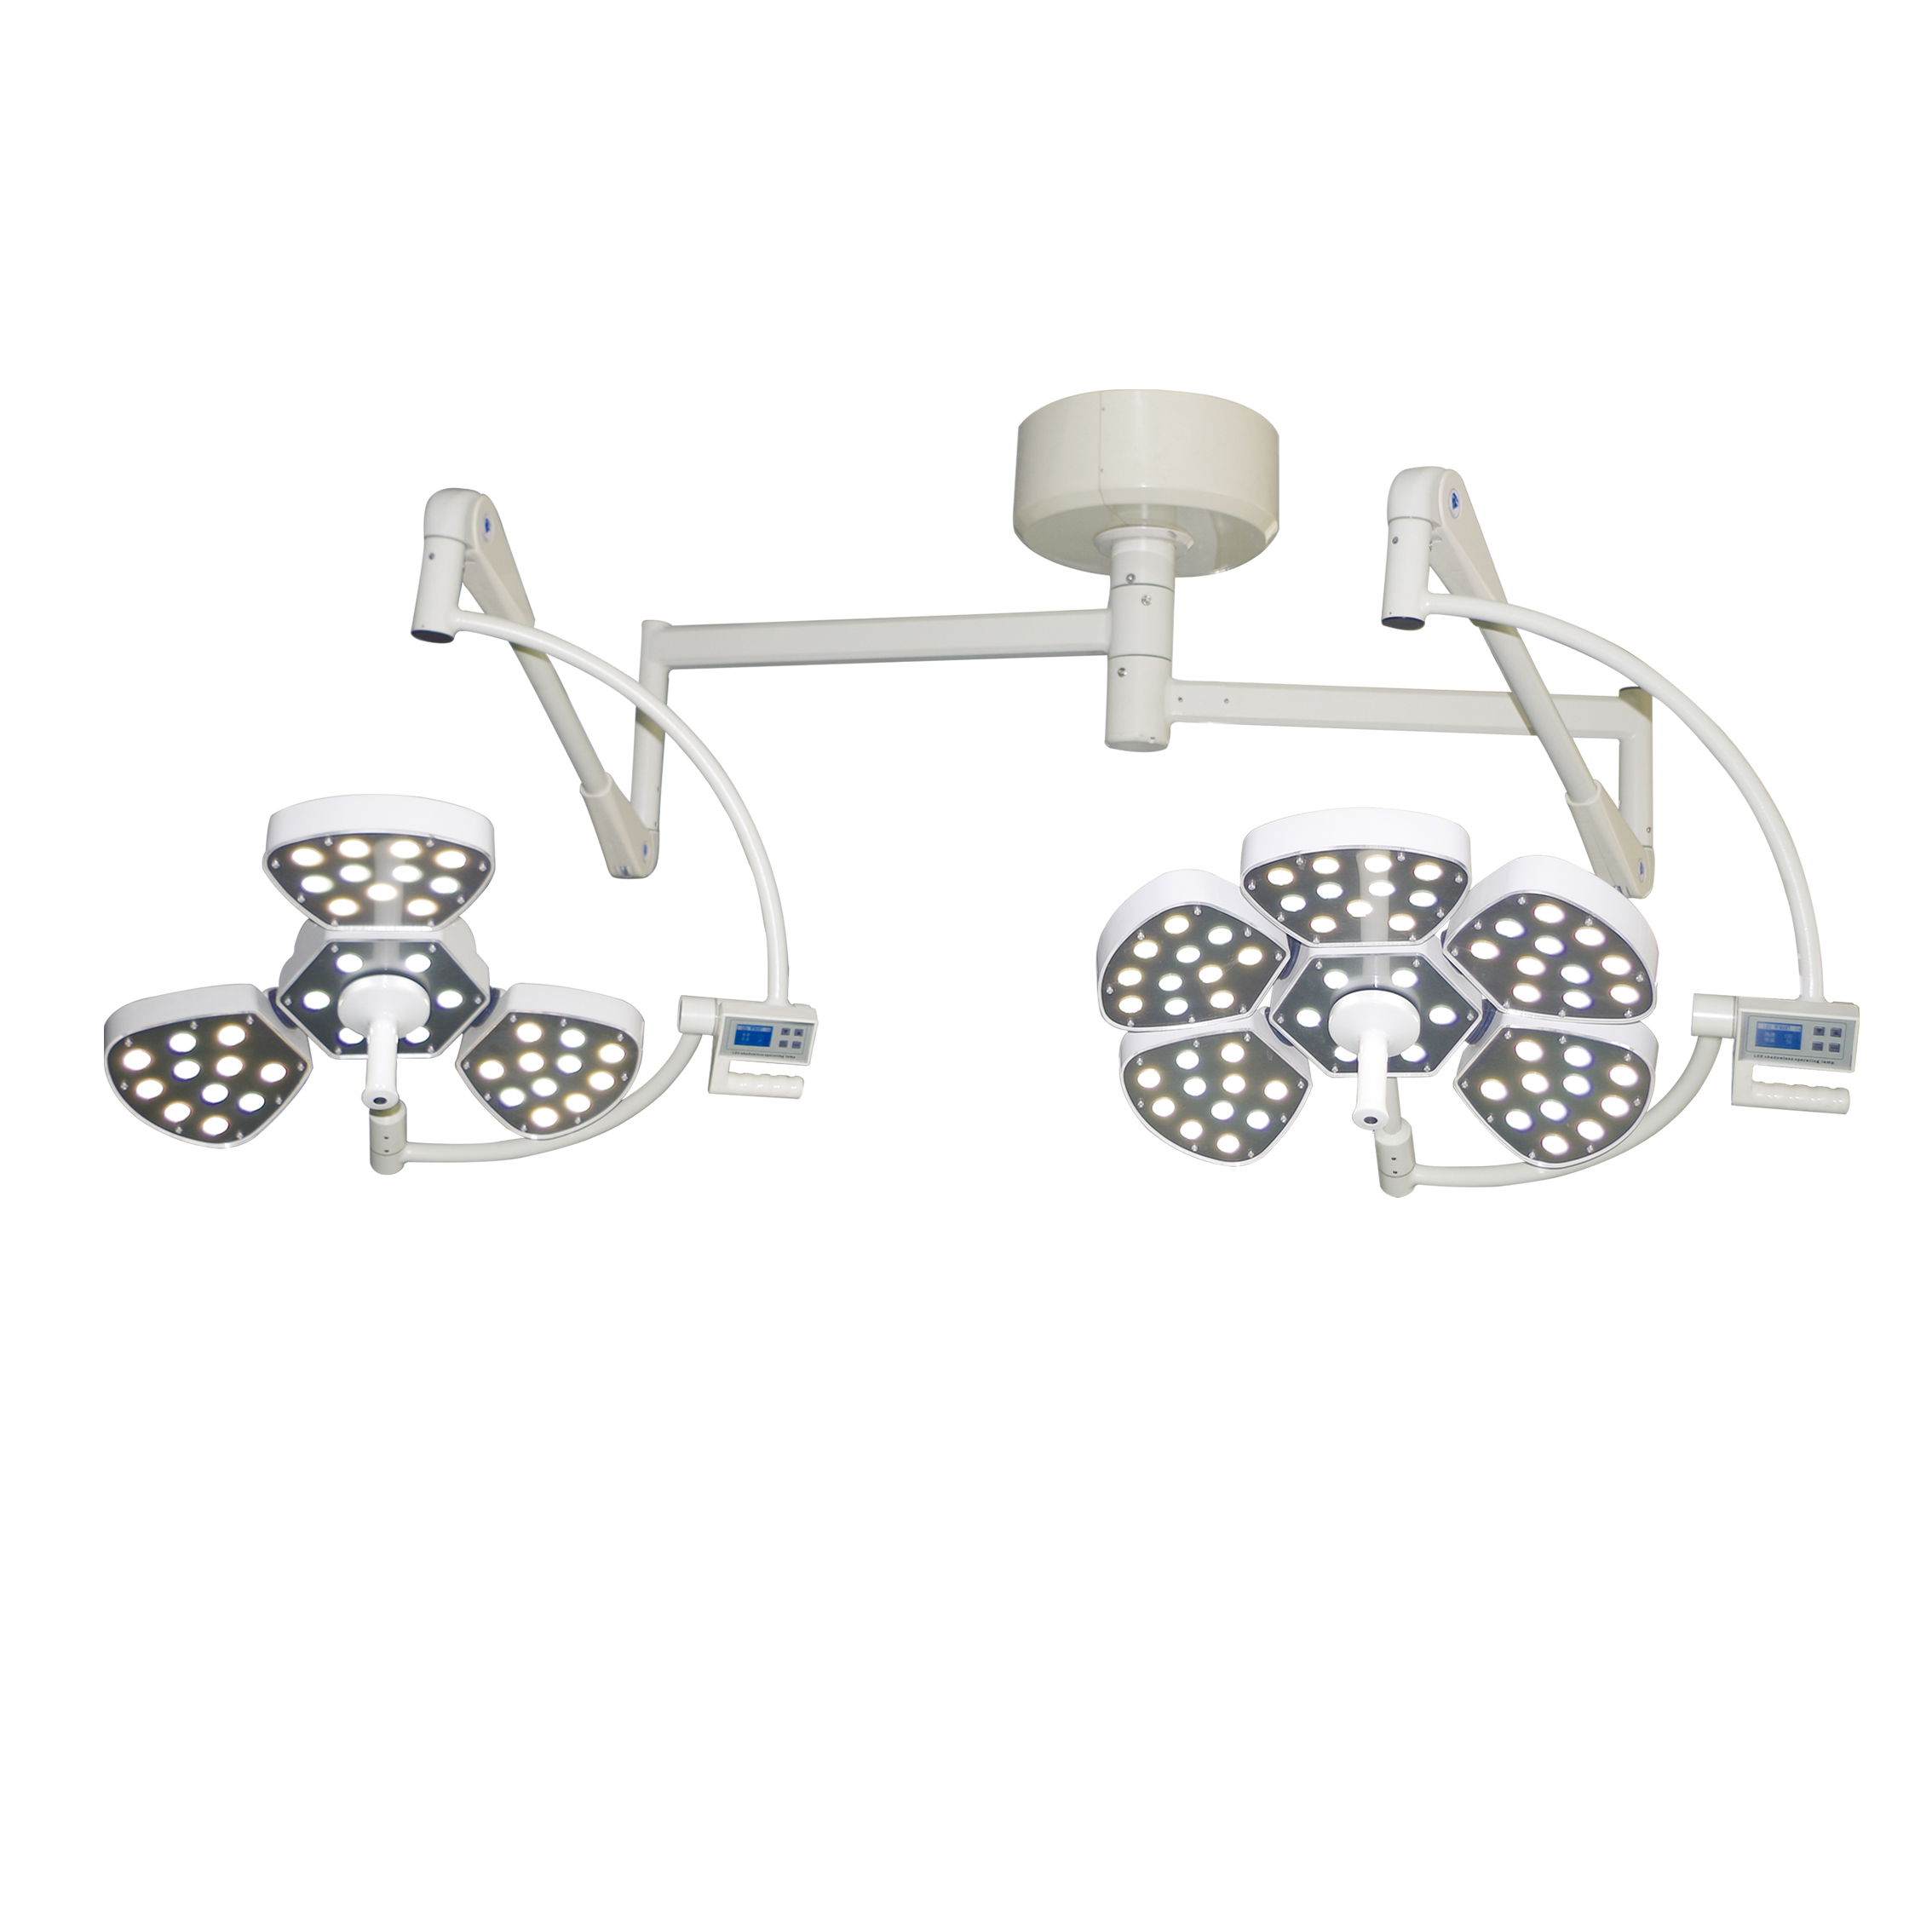 Ceiling LED Surgical Light(5/3)